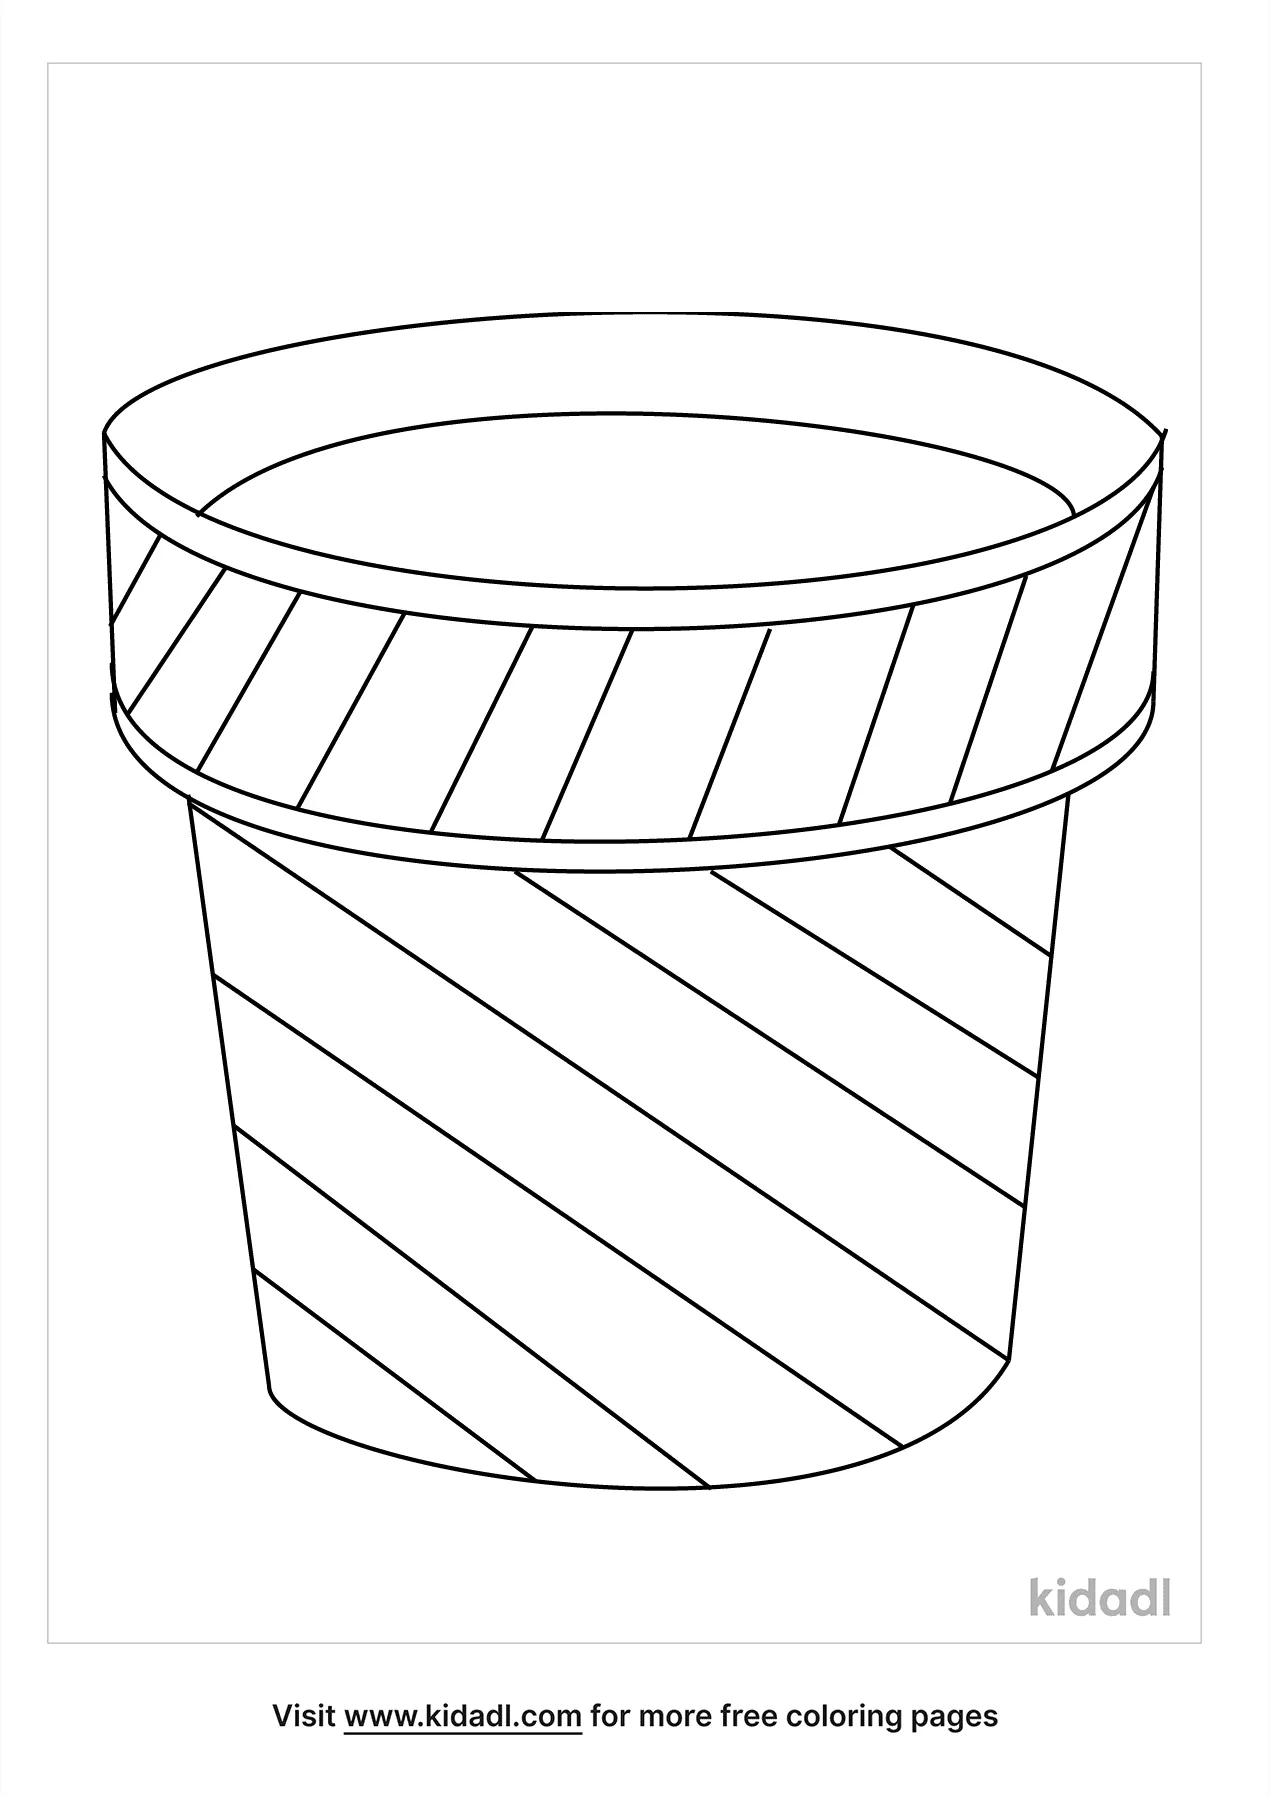 Flower Pot Coloring Pages   Free Flowers Coloring Pages   Kidadl